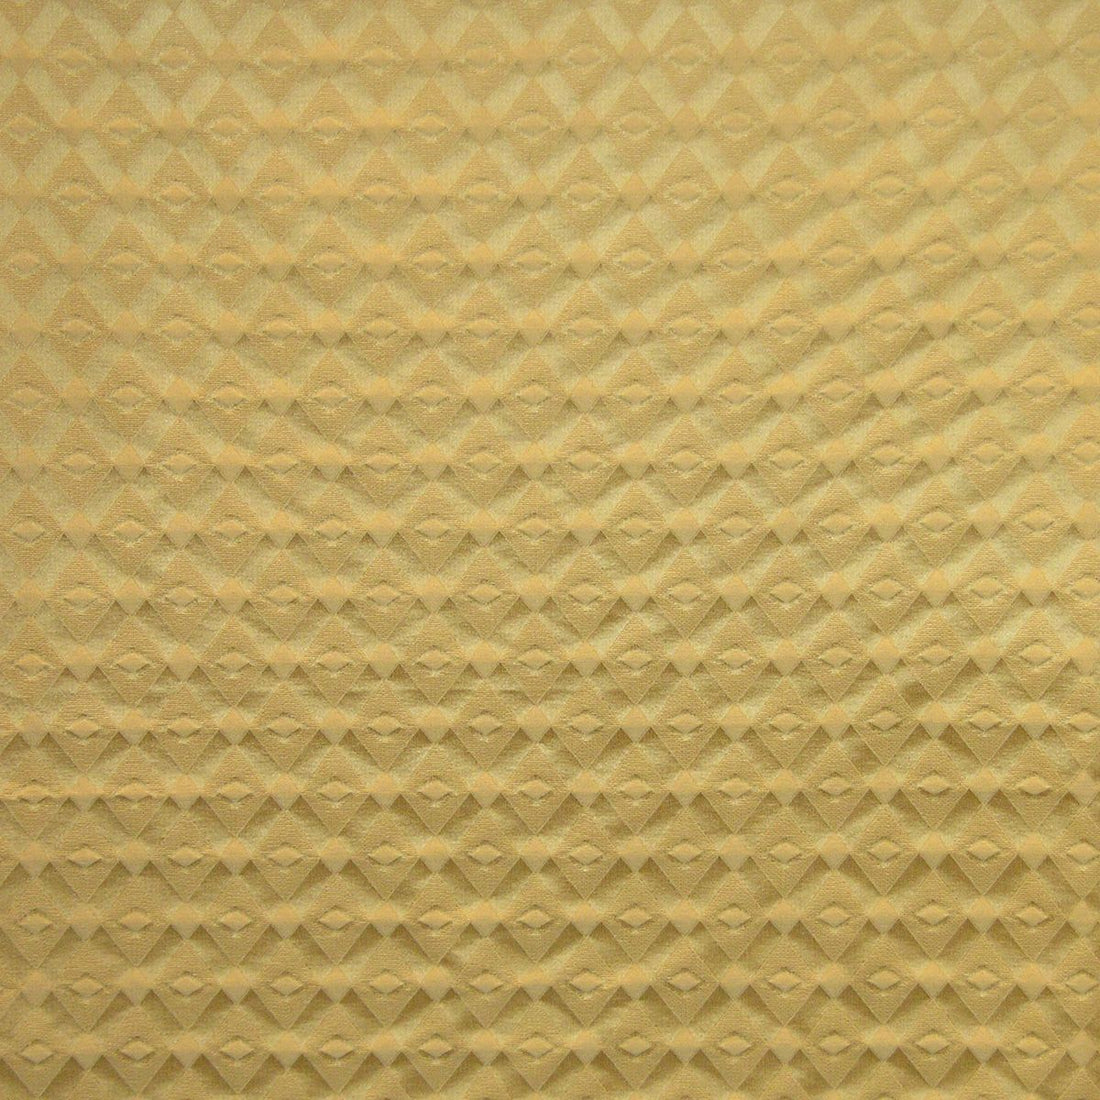 San Sebastian fabric in gold color - pattern number RA 00041263 - by Scalamandre in the Old World Weavers collection